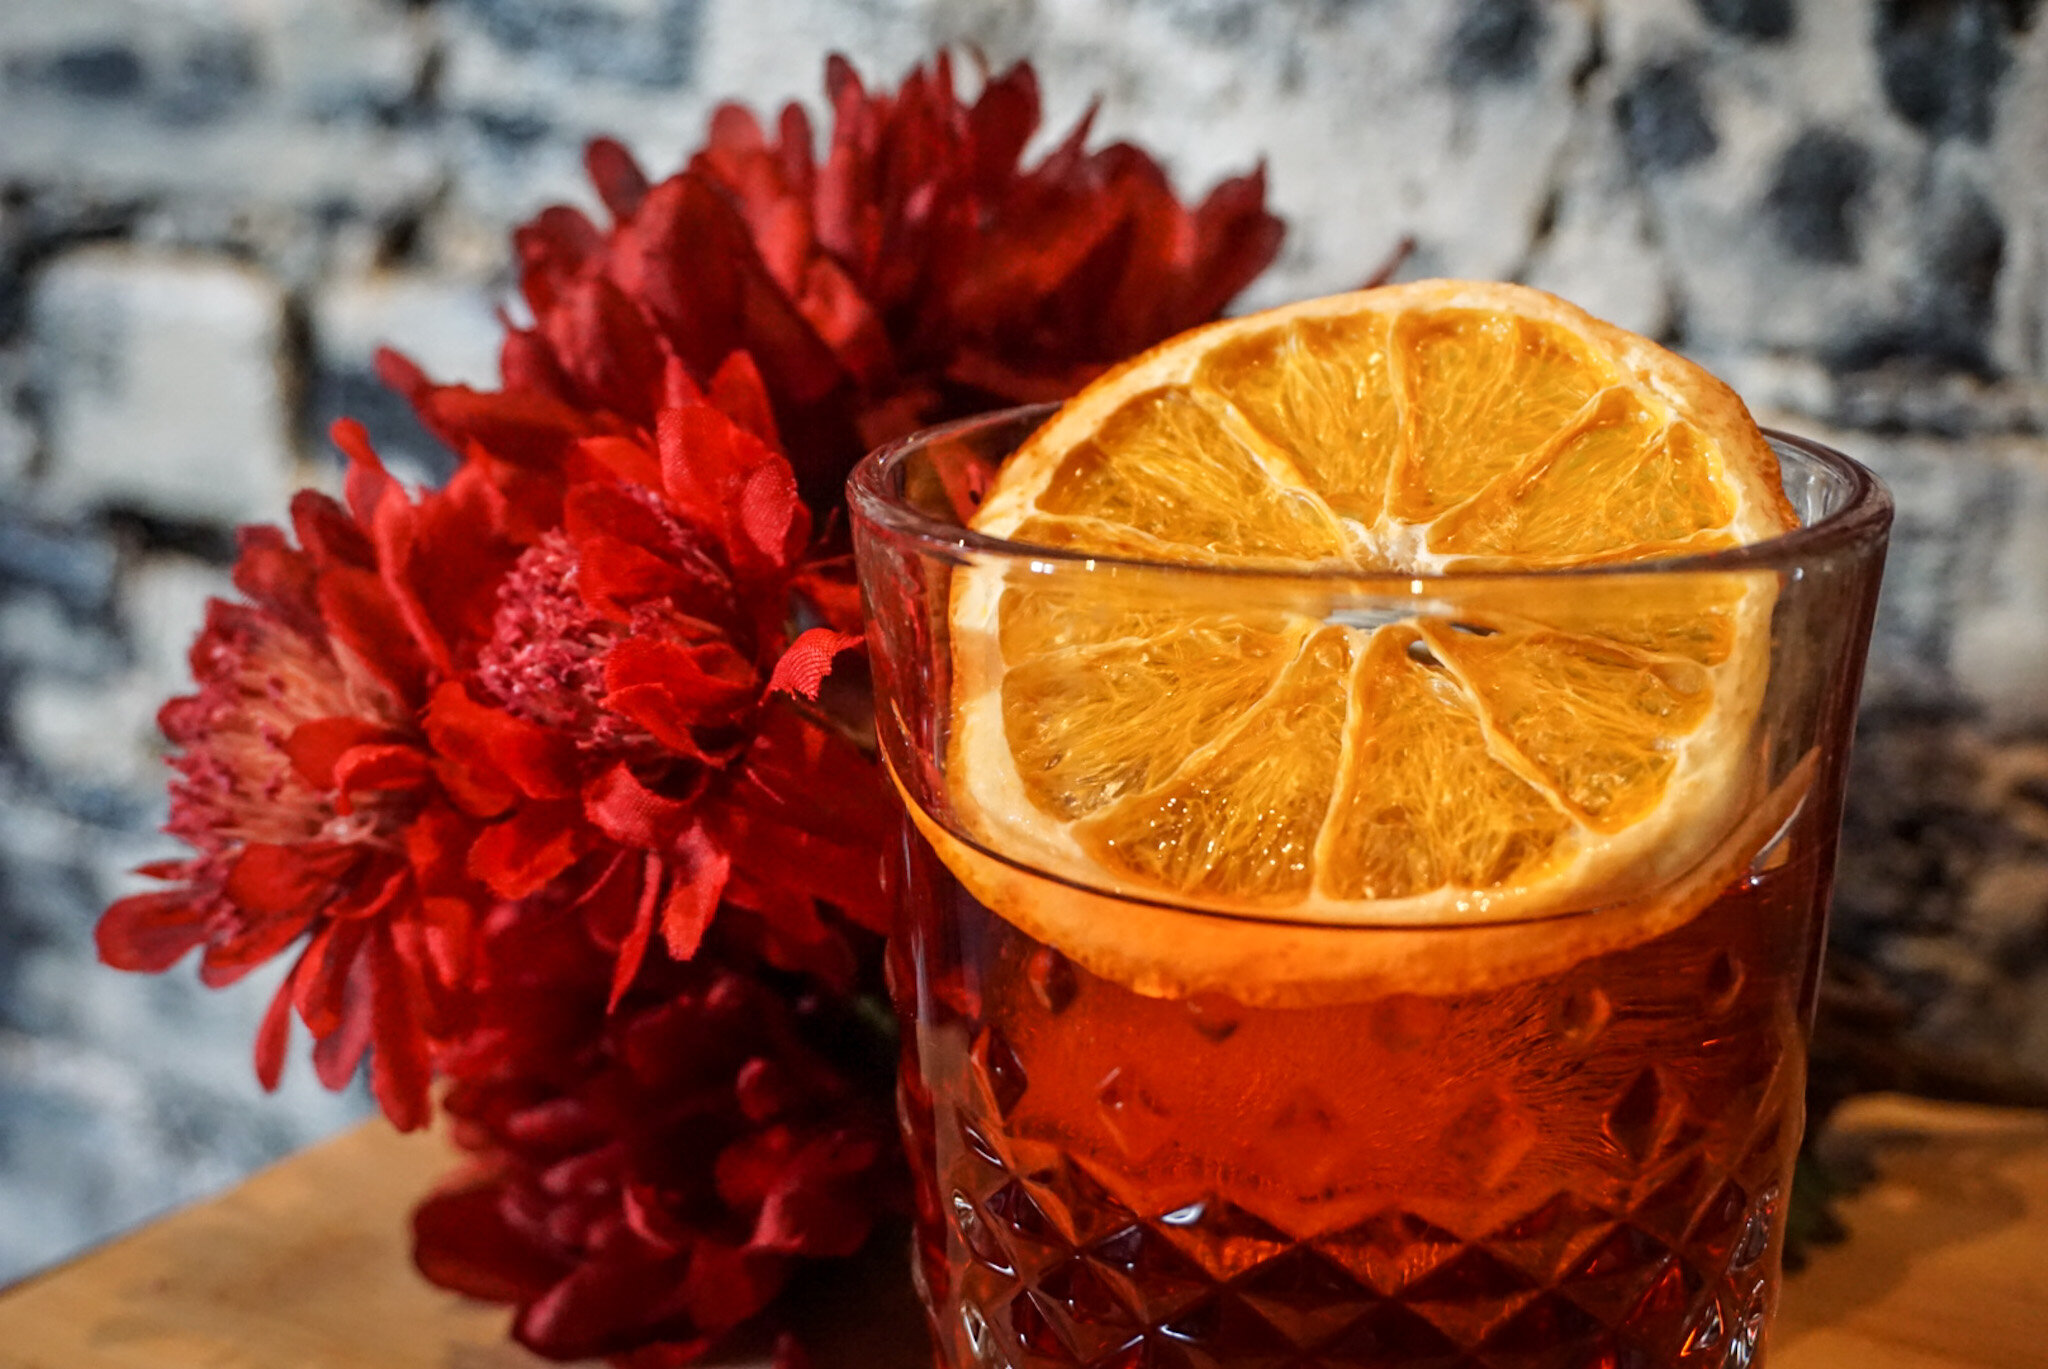  A colorful red cocktail garnished with a dehrydated orange slice next to a red bouquet of flowers. 